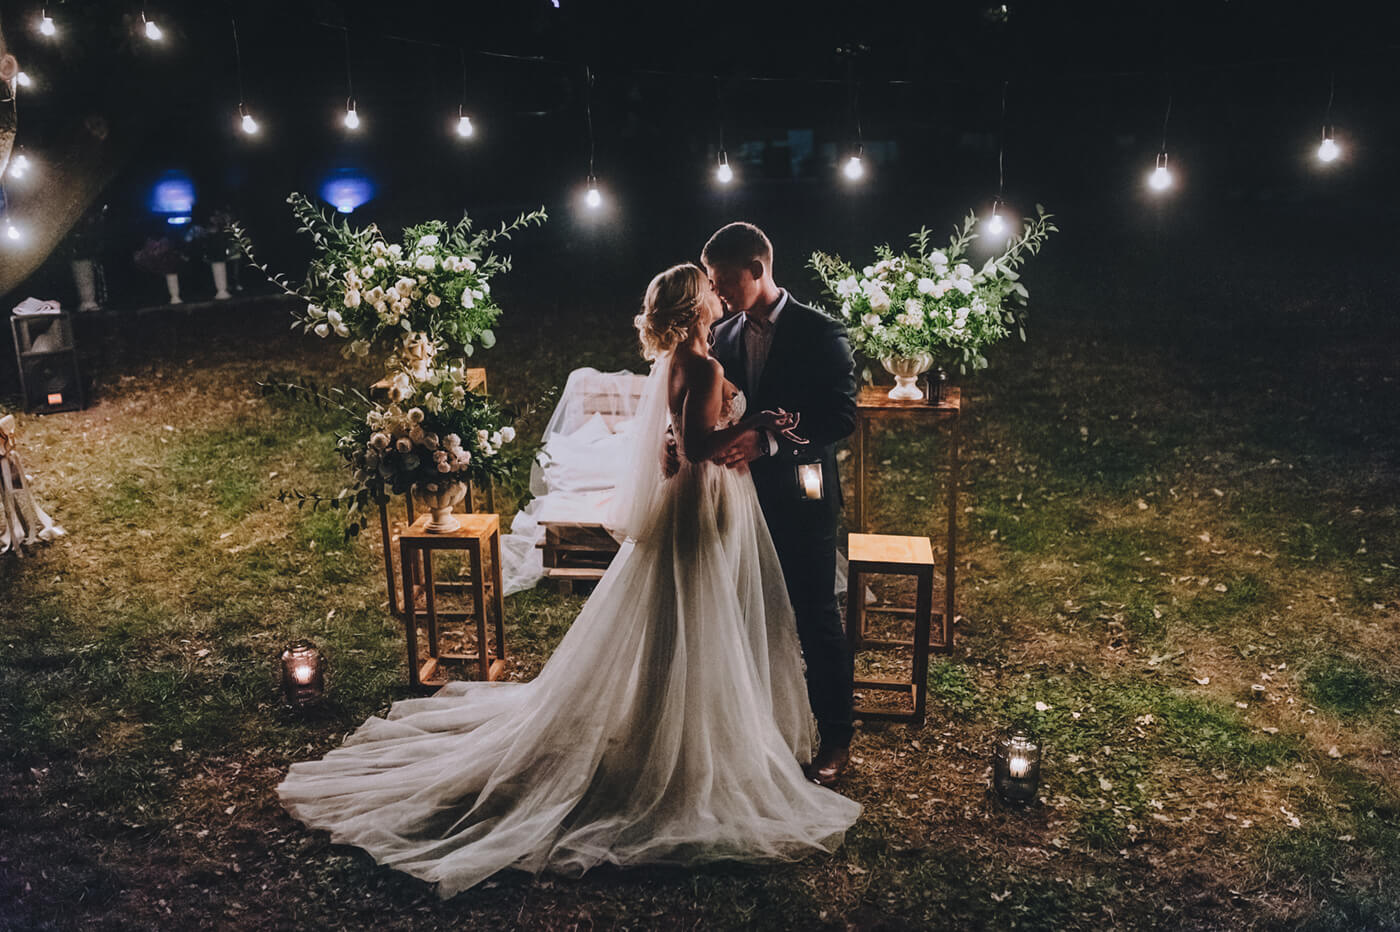 Choosing the Right Wedding Photos for Your Album